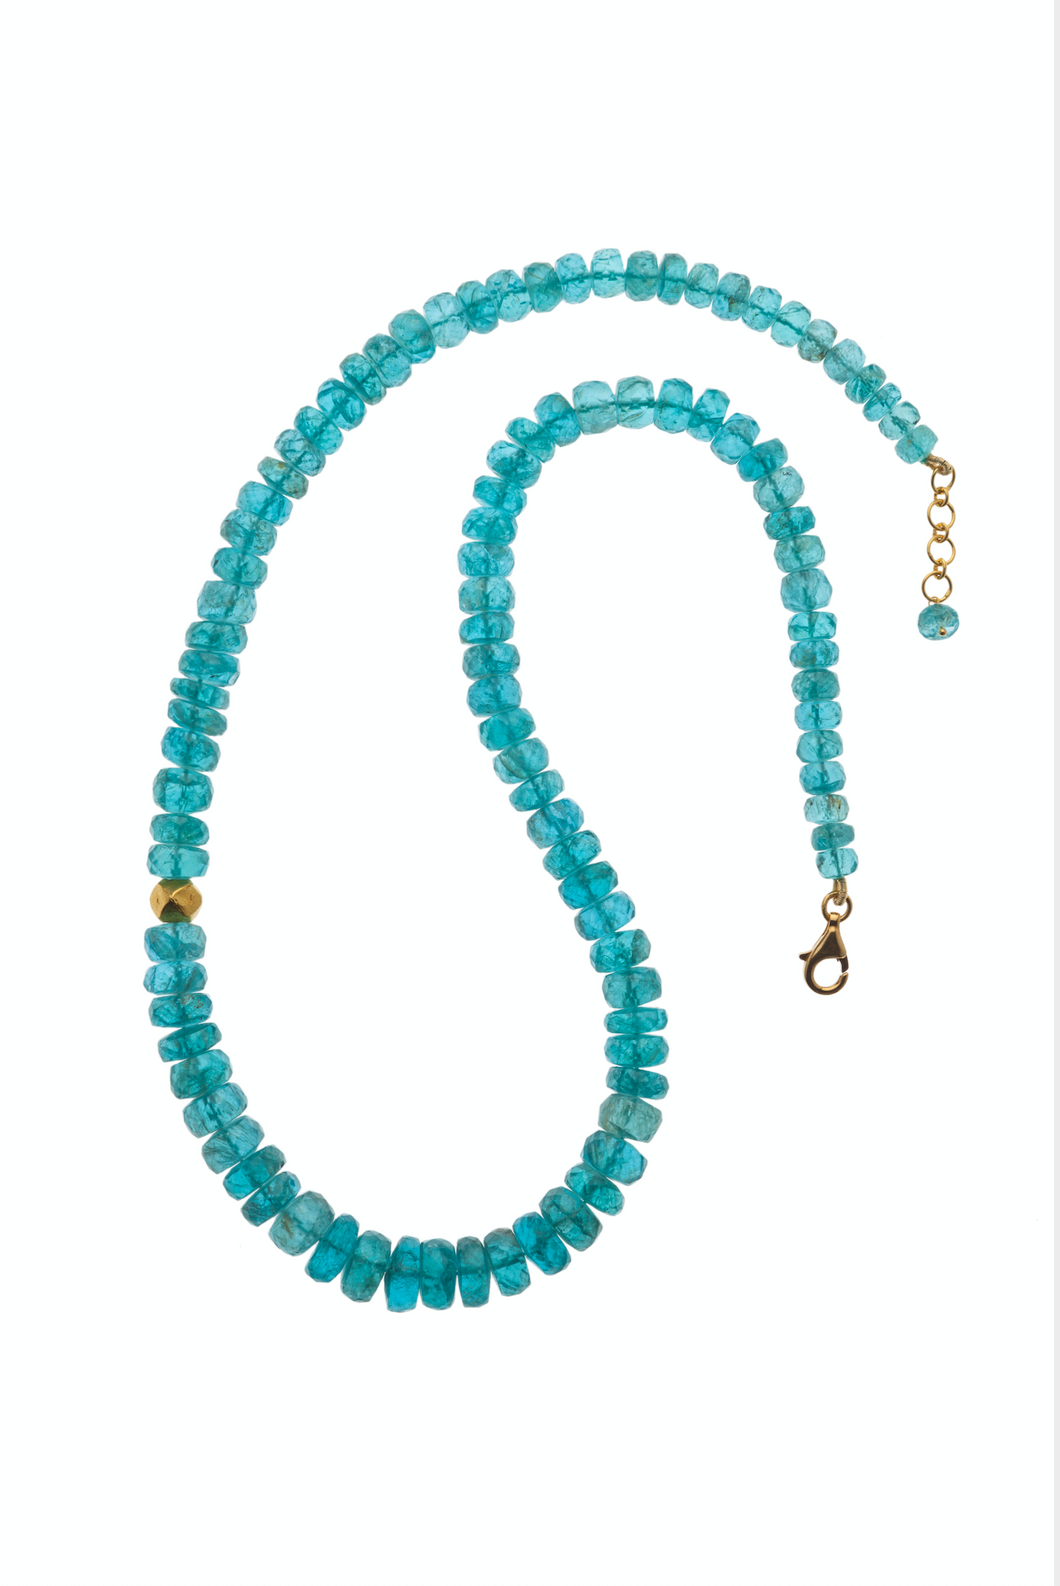 Apatite Beaded Gemstone Necklace in 18kt Gold N002-A